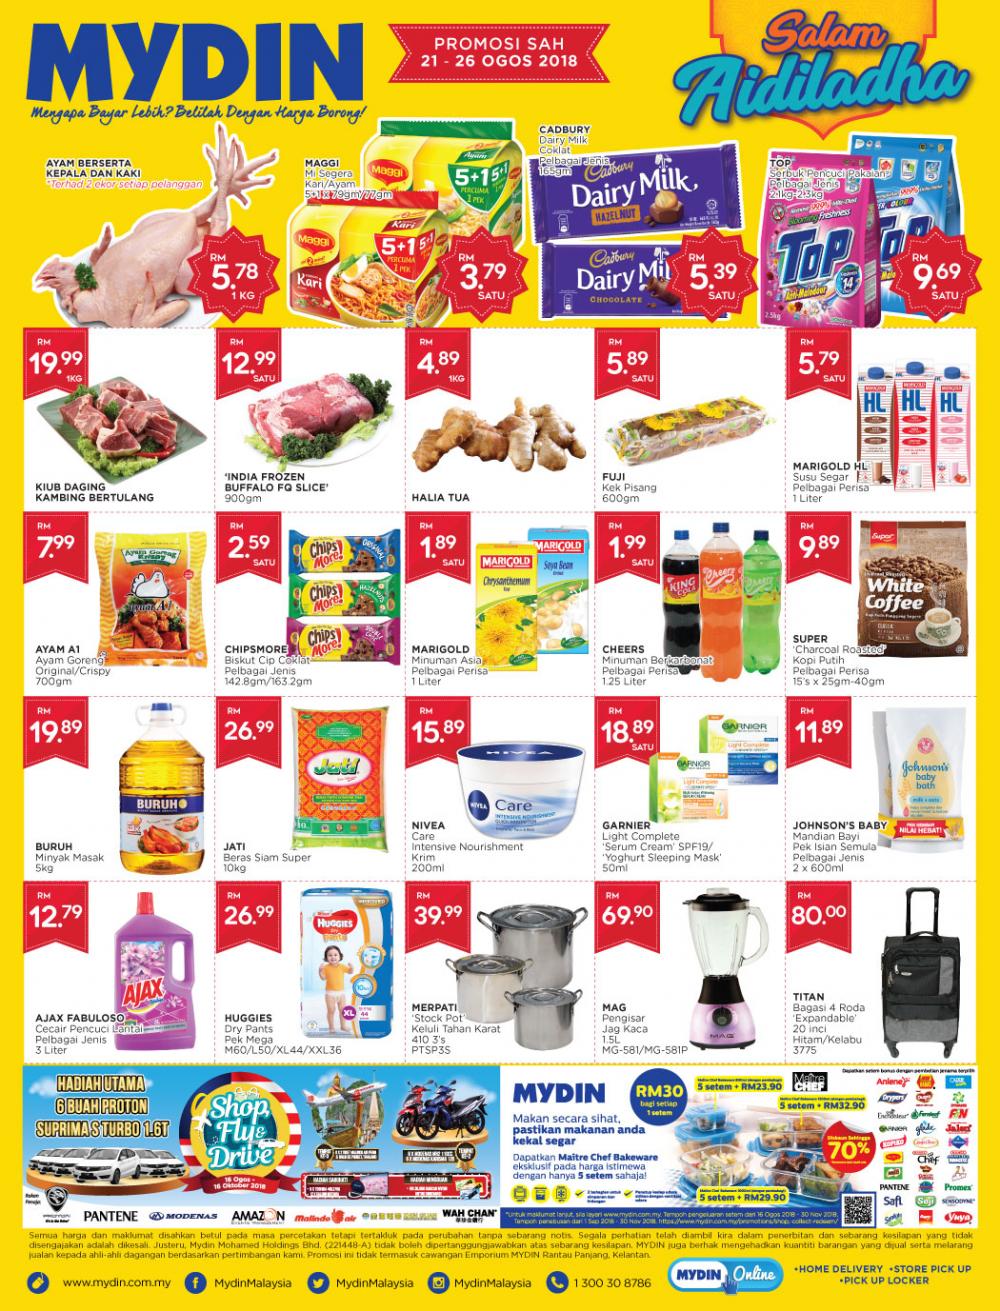 MYDIN TOP 20 WEH Promotion (21 August 2018 - 26 August 2018)